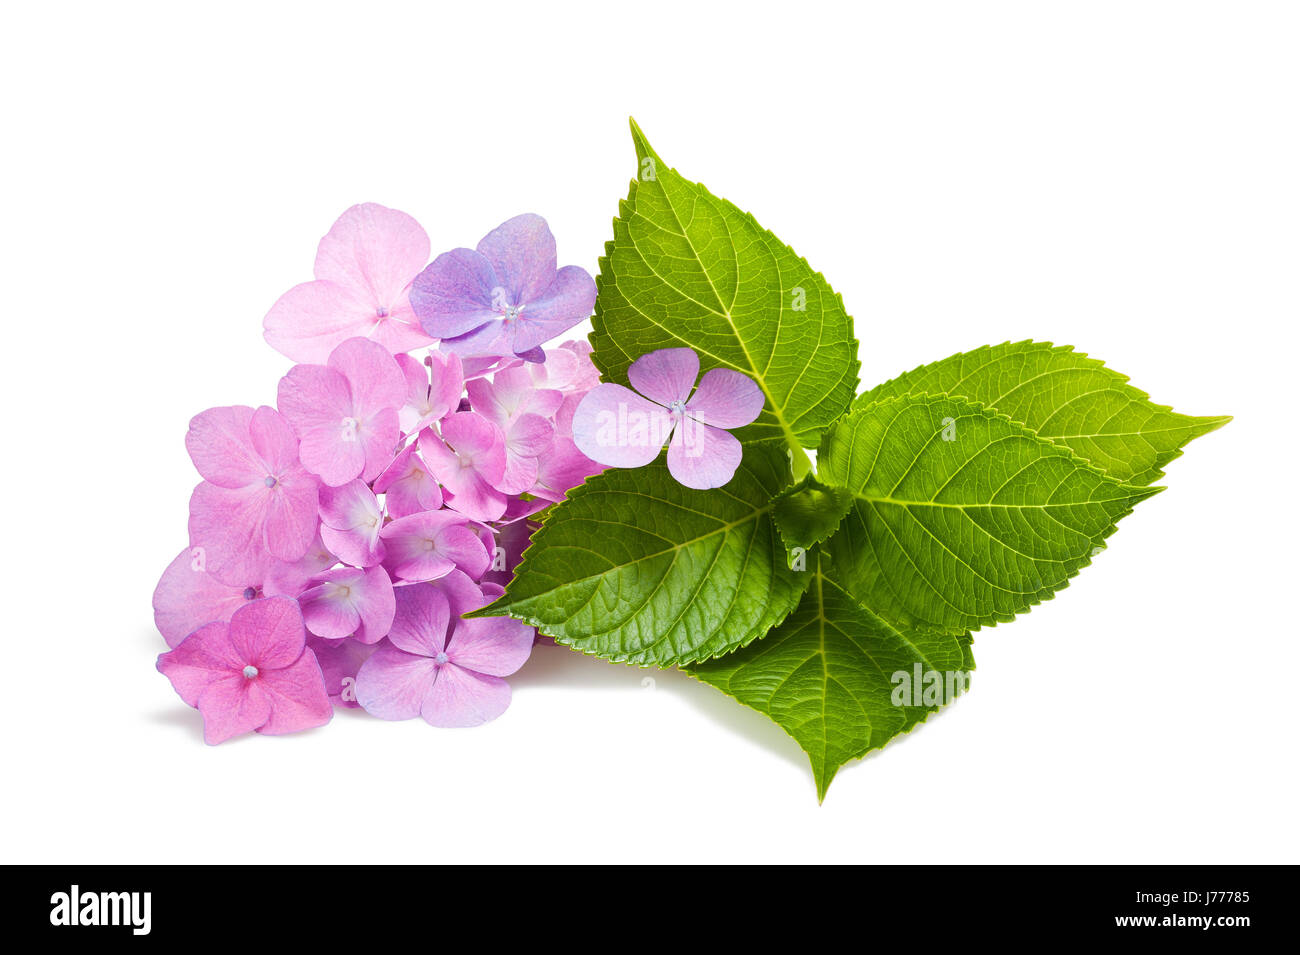 Hortensia flowers and leaves isolated on white Stock Photo